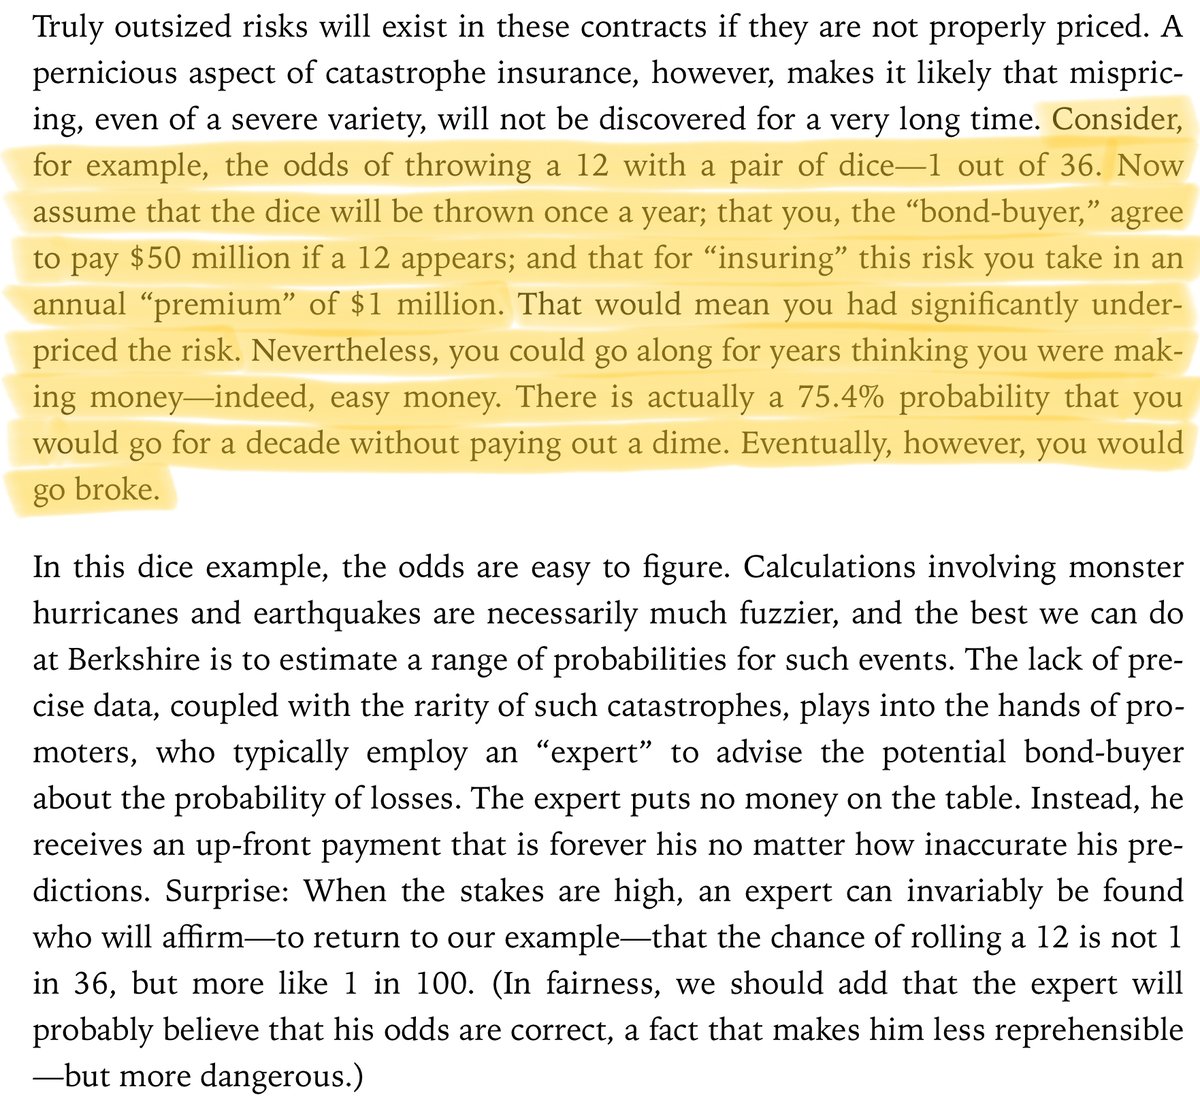 30/As usual, I'll leave you with a few references.Buffett's letters are a great resource if you want to understand probabilistic thinking in insurance applications (like the earthquake insurance example above).For example, here are excerpts from his 1997 and 2005 letters: